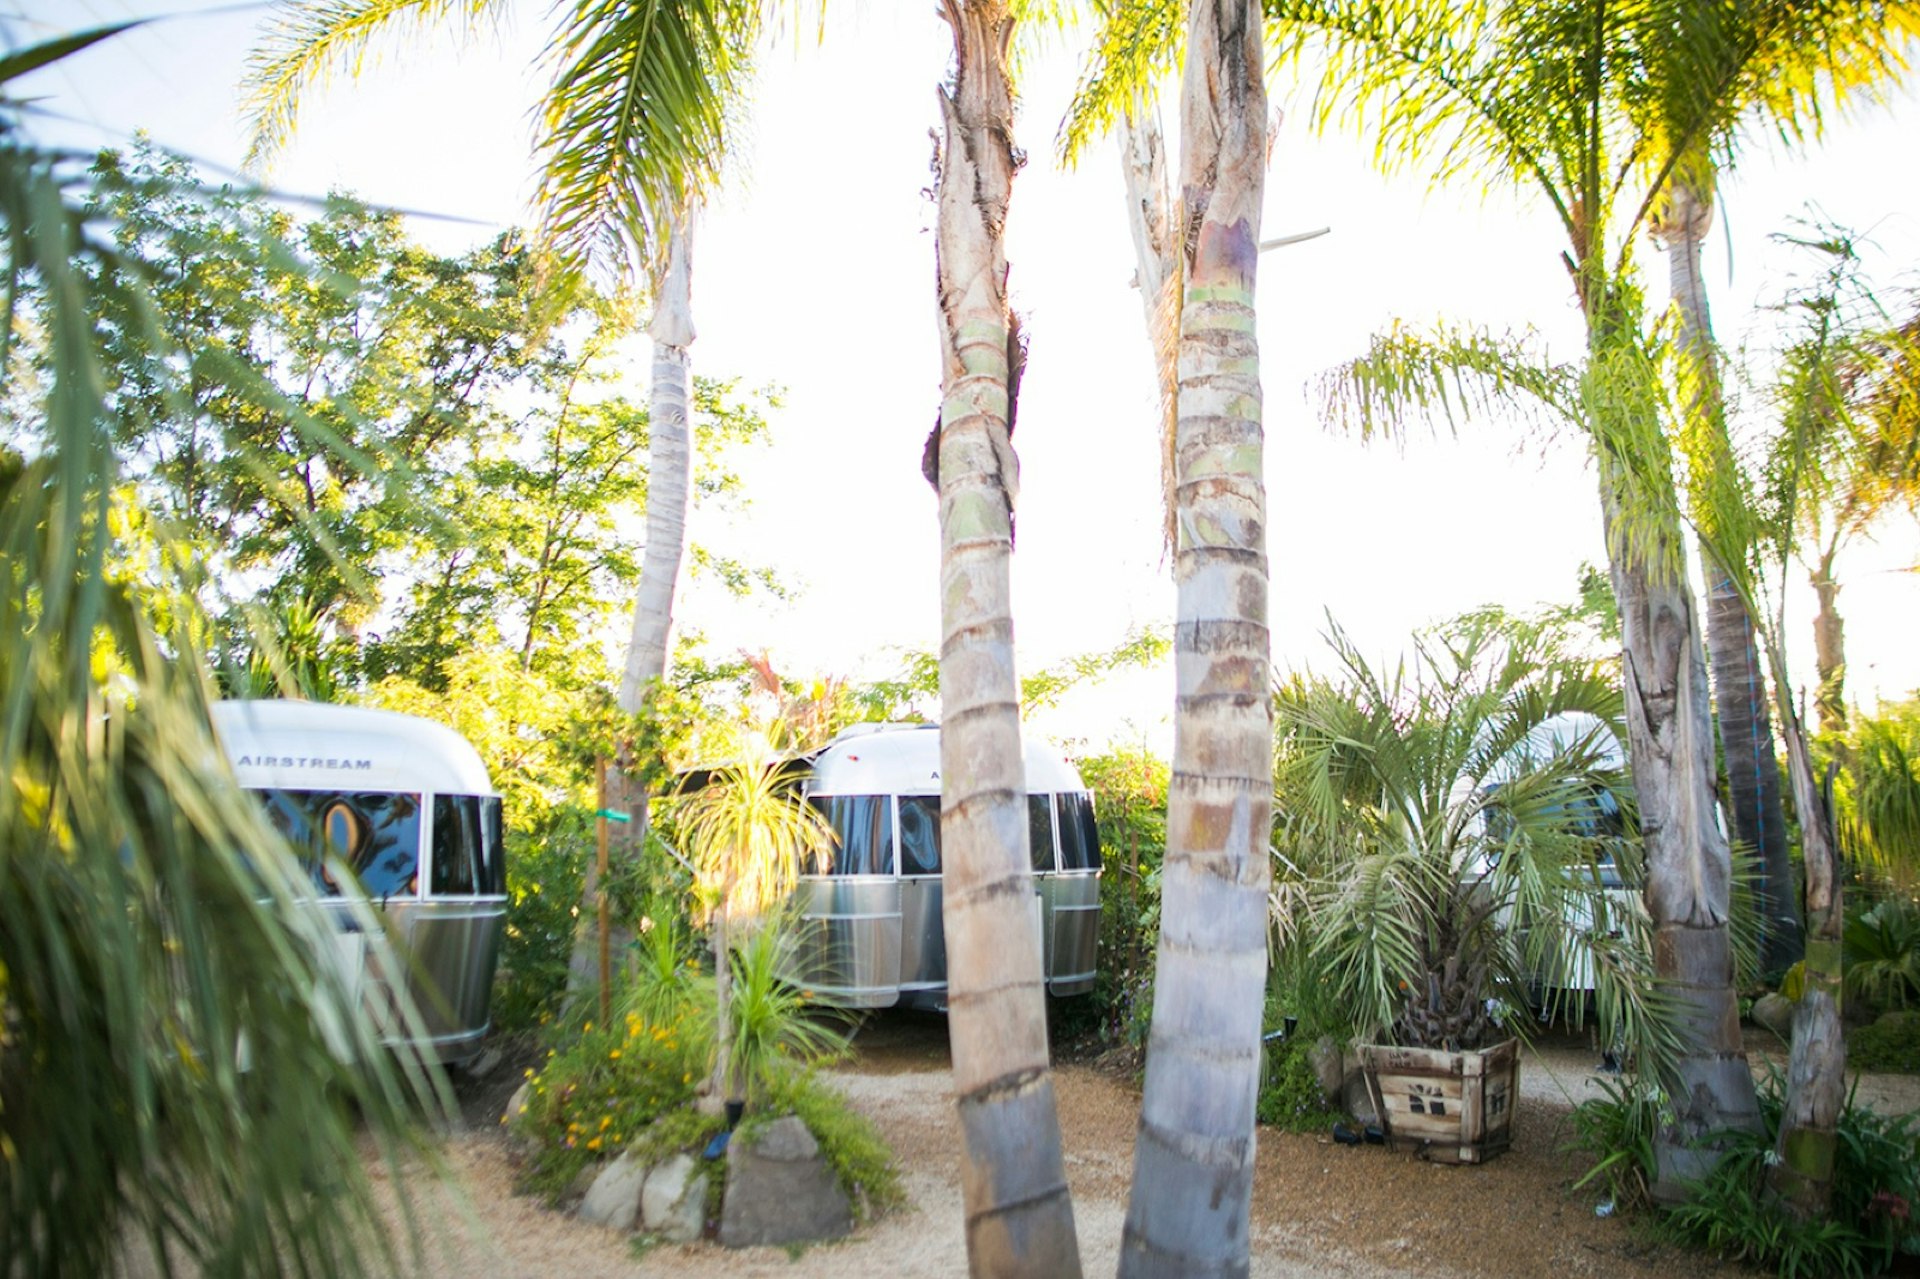 Silver airstream trailers shine in the sun under palm trees